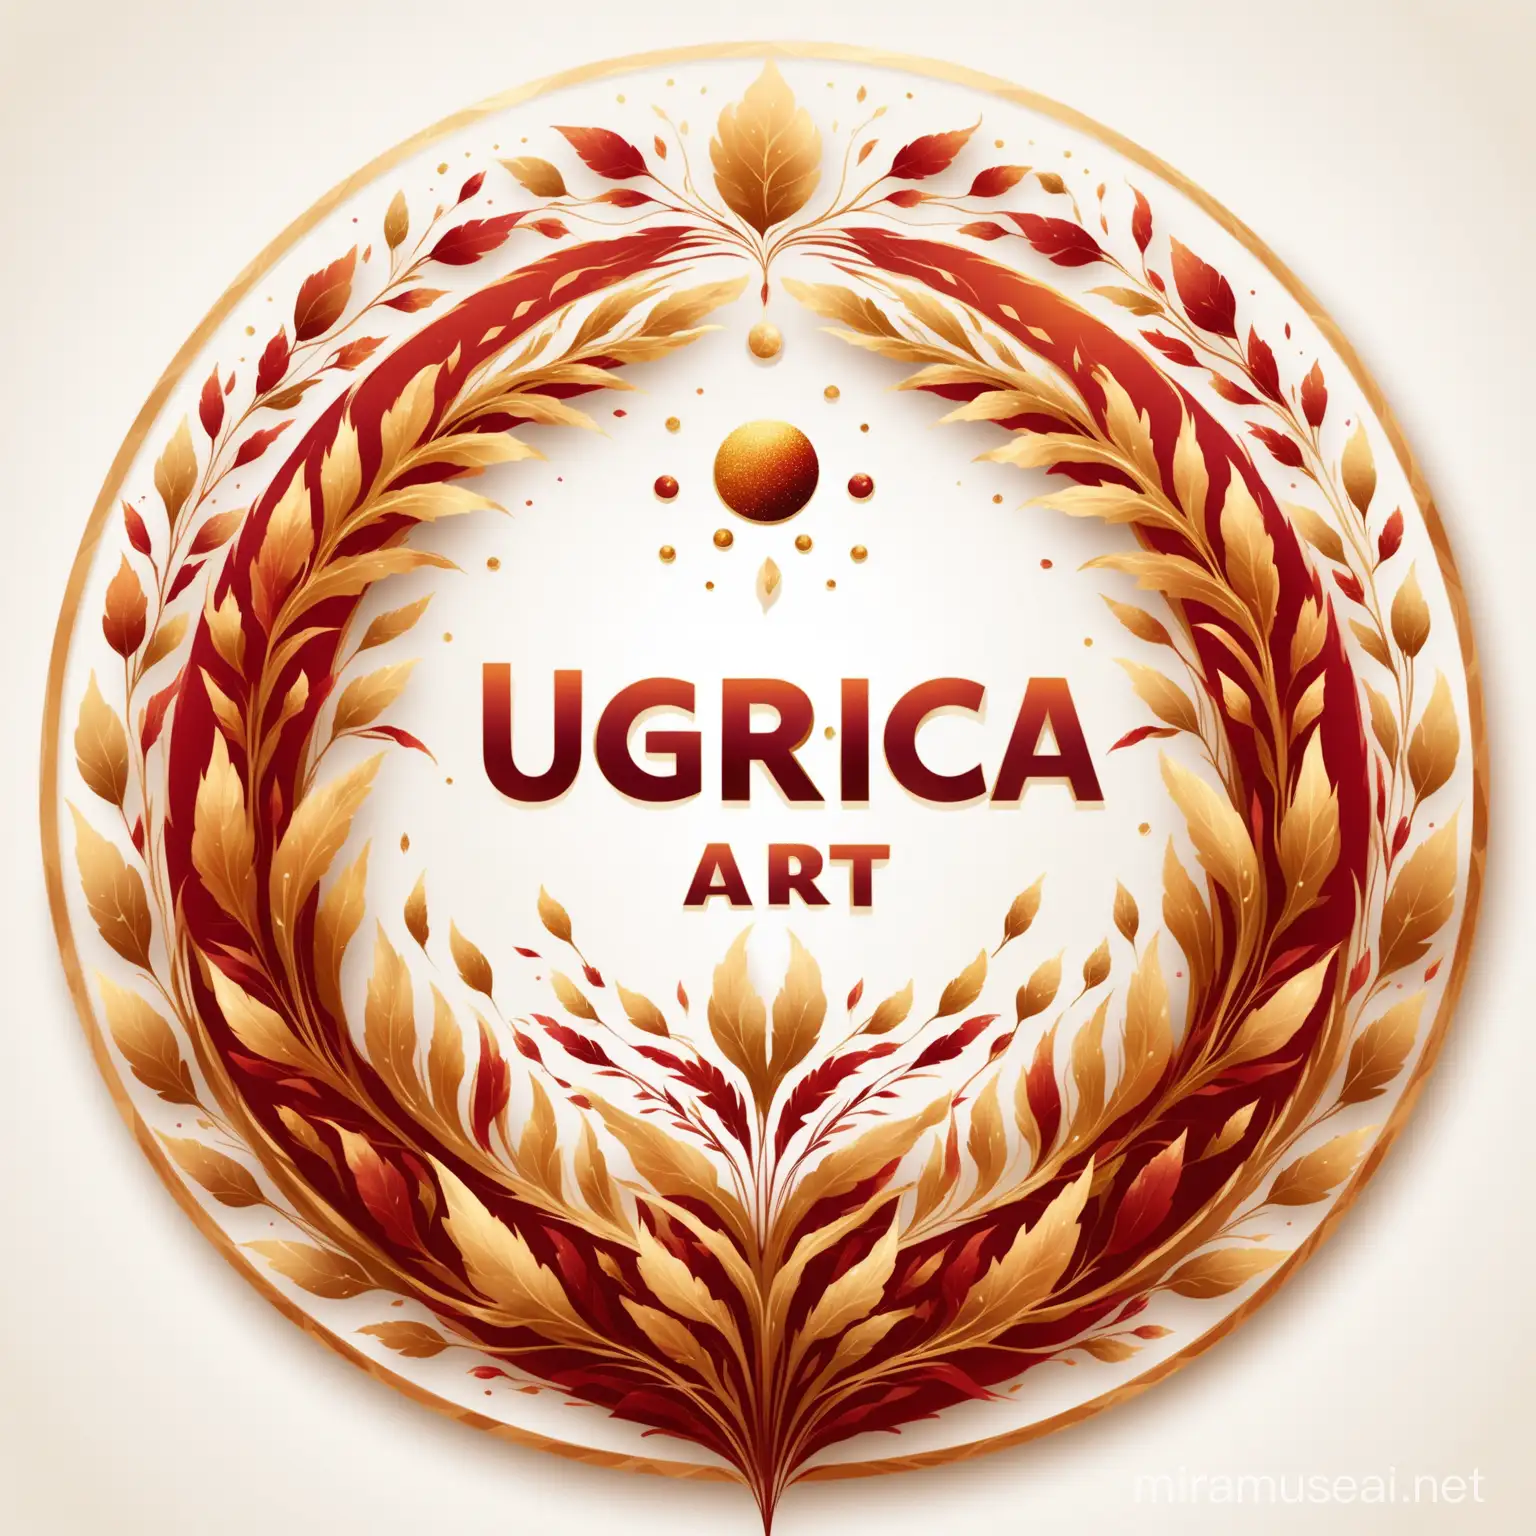 Surreal UGRICA ART Circular Logo in Red and Gold on White Background